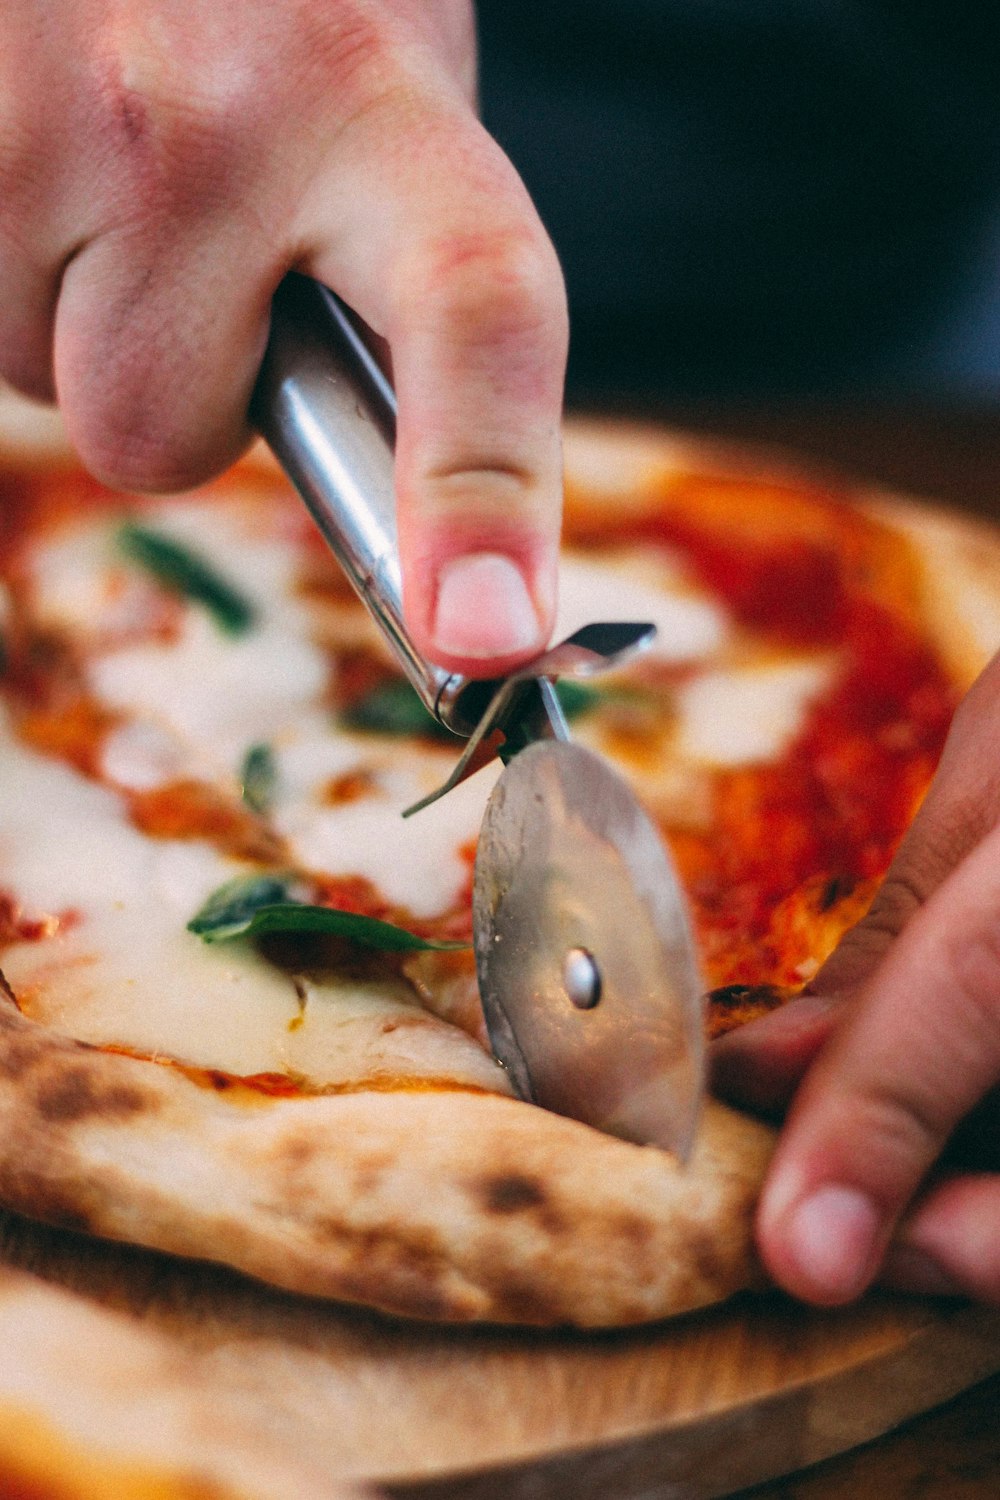 person holding stainless steel knife slicing pizza